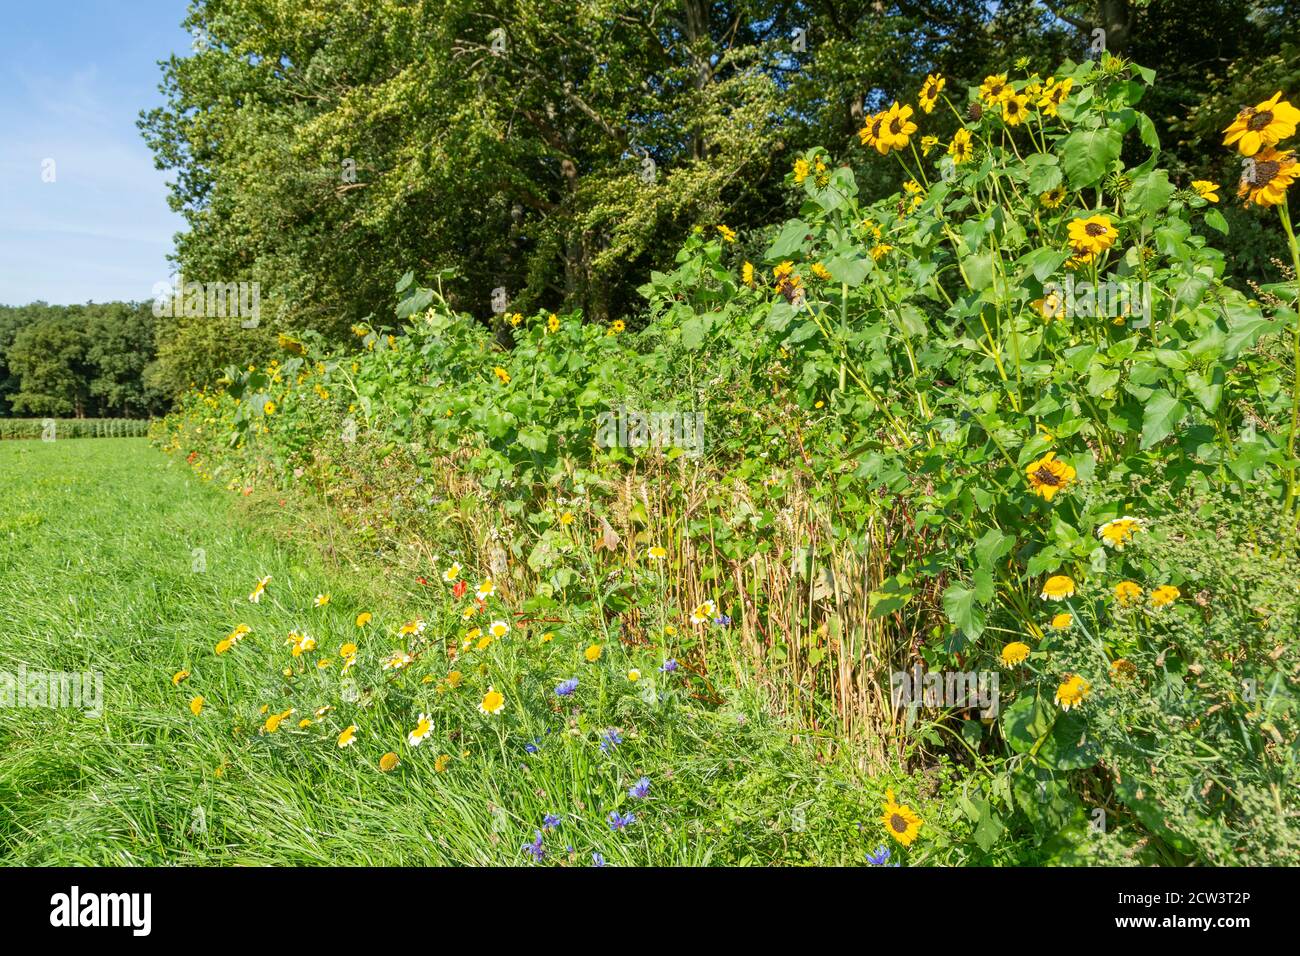 Nature-inclusive or circular and sustainable agriculture with sun flowers along cultivated agricutkrual grass field in the Netherlands, Europe Stock Photo